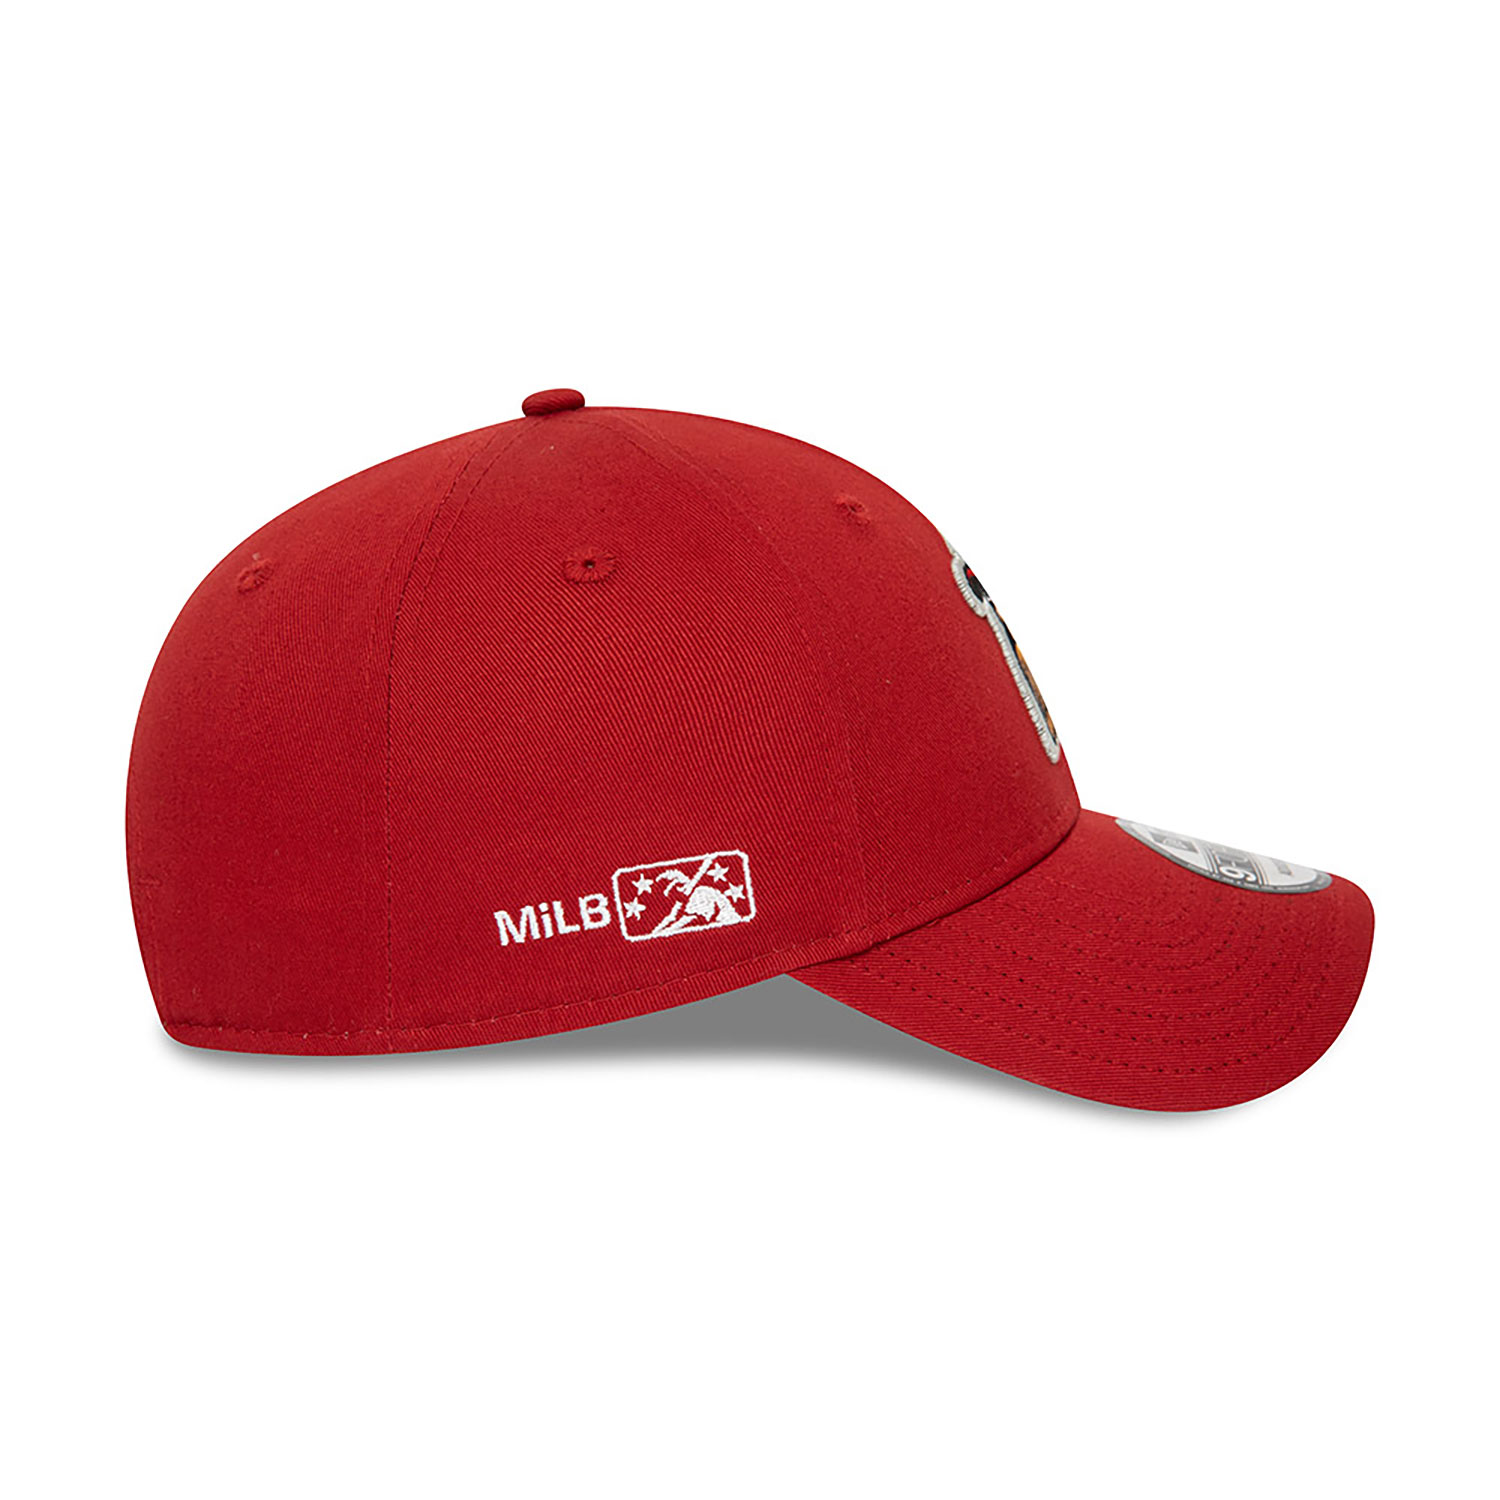 Modesto Nuts Minor League Red 9FORTY Adjustable Cap